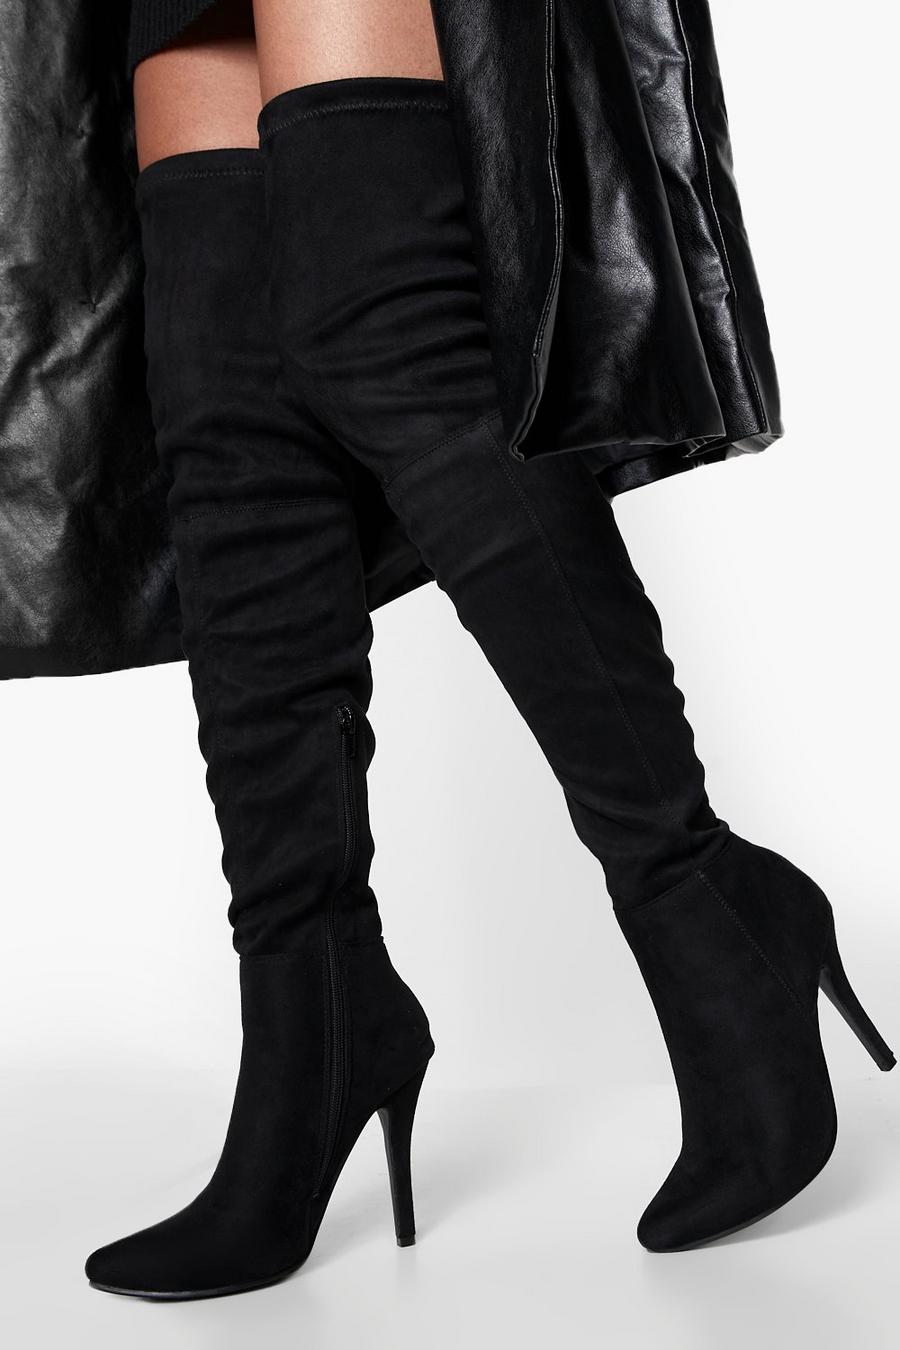 Black Tie Detail Over The Knee Boots Heeled Boots image number 1